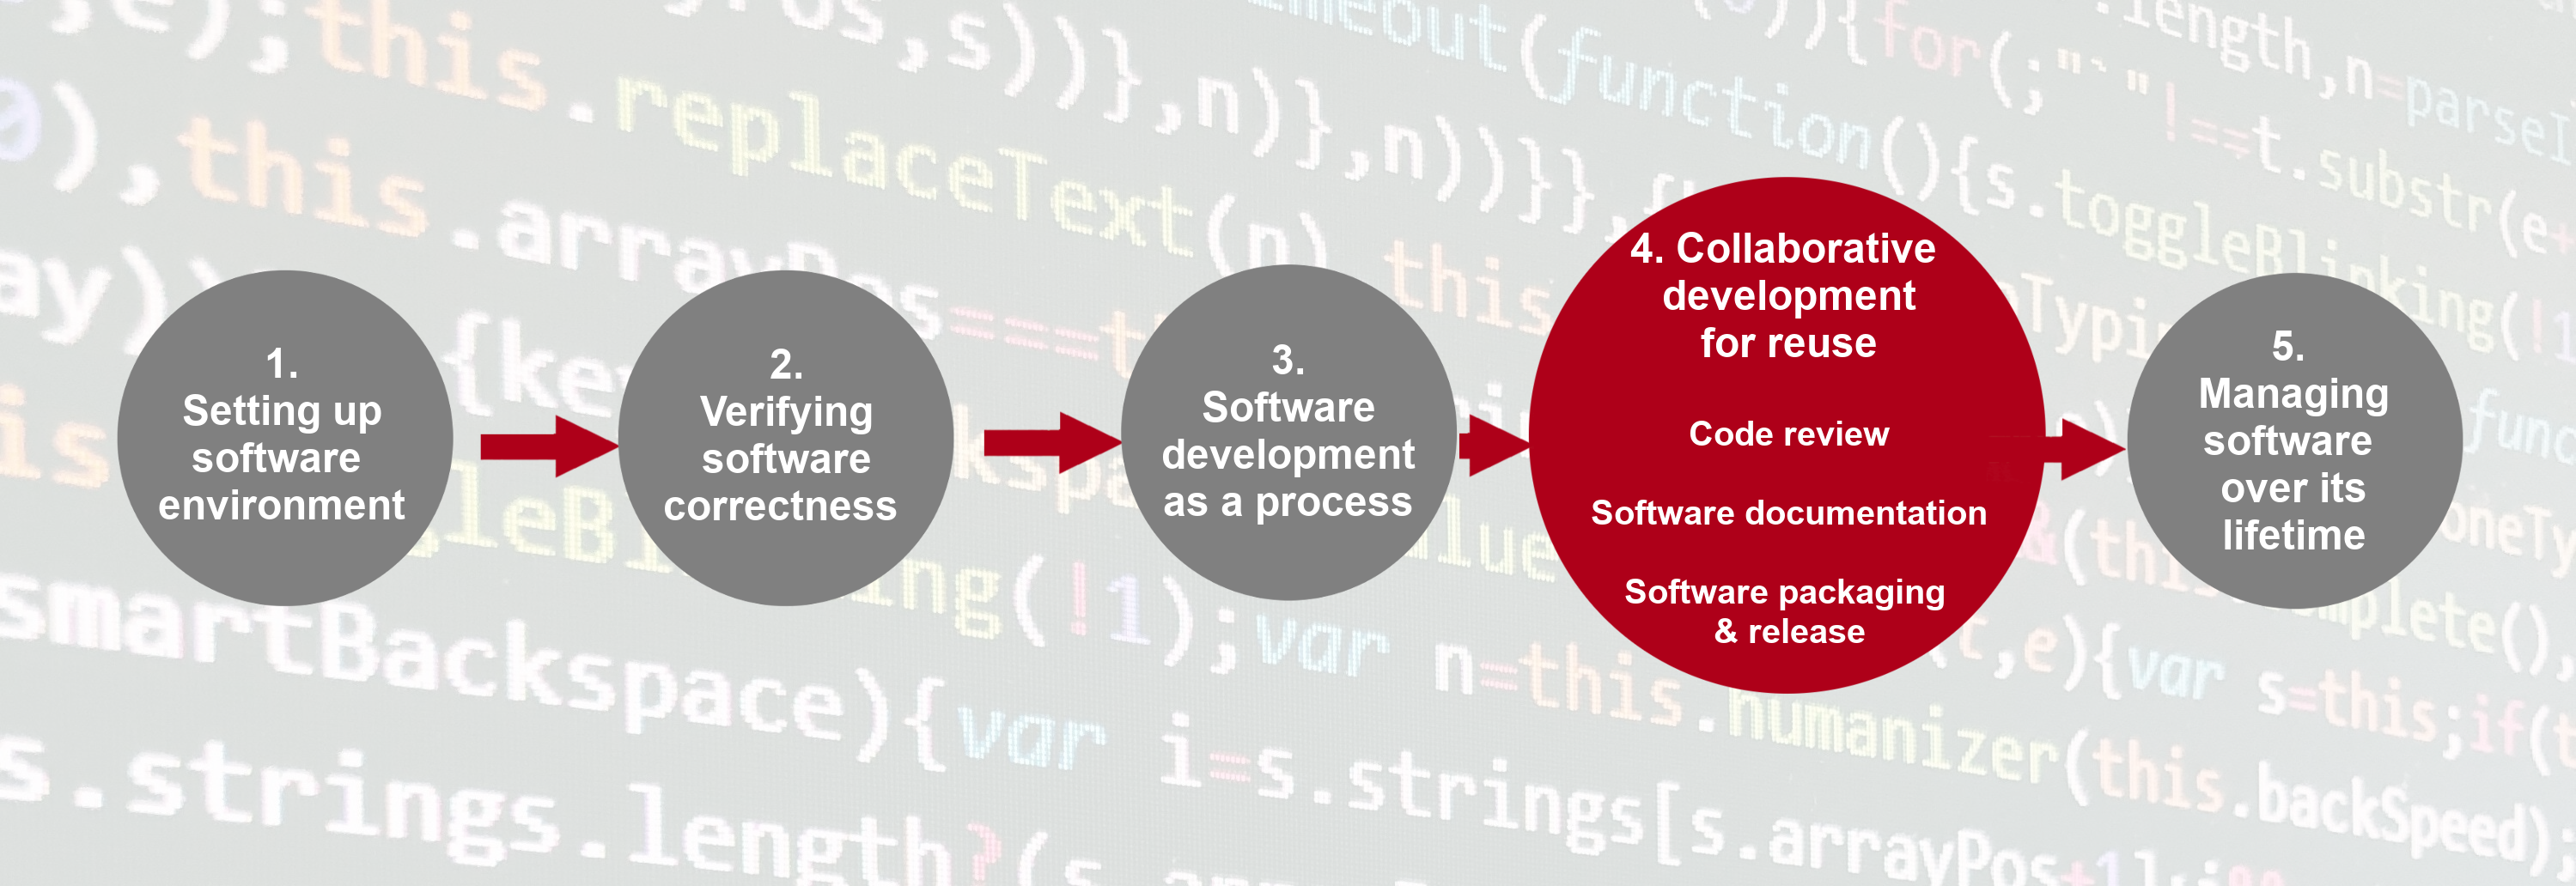 Software design and architecture